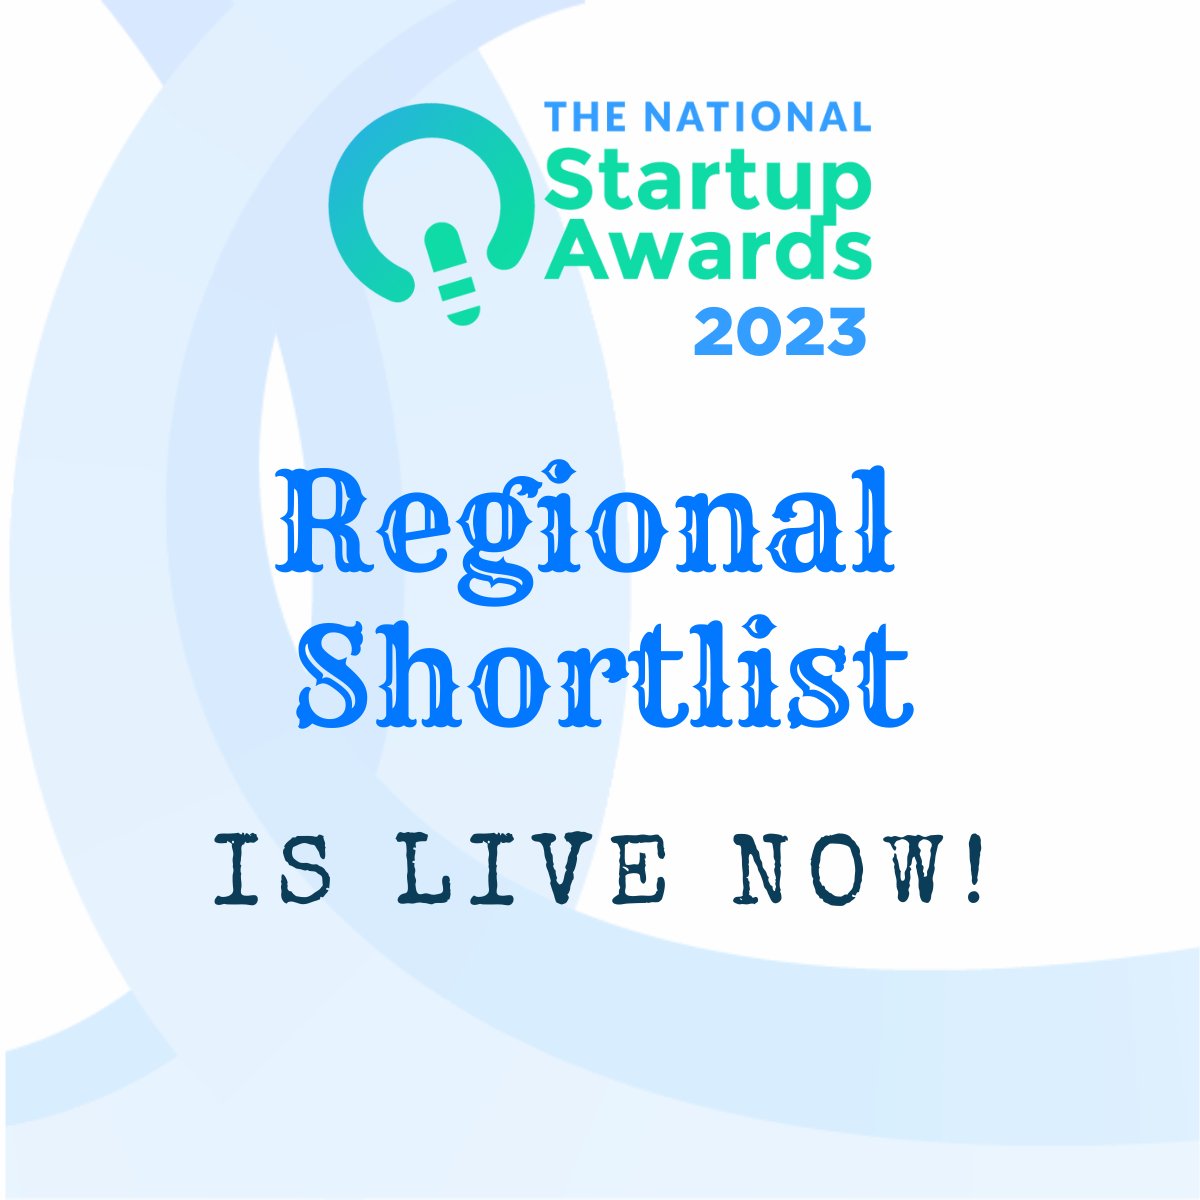 Regional Shortlist 2023 is now Online! startupawards.ie A huge congratulations to all our shortlisted Startups! @entirl @sageireland @mccannfitz @Cronin_Co @Microfinanceire @DCCEconDev @DubCityCouncil @furthr_ie @startupaccountant.ie @LEOCountyClare #yourstartupjourney